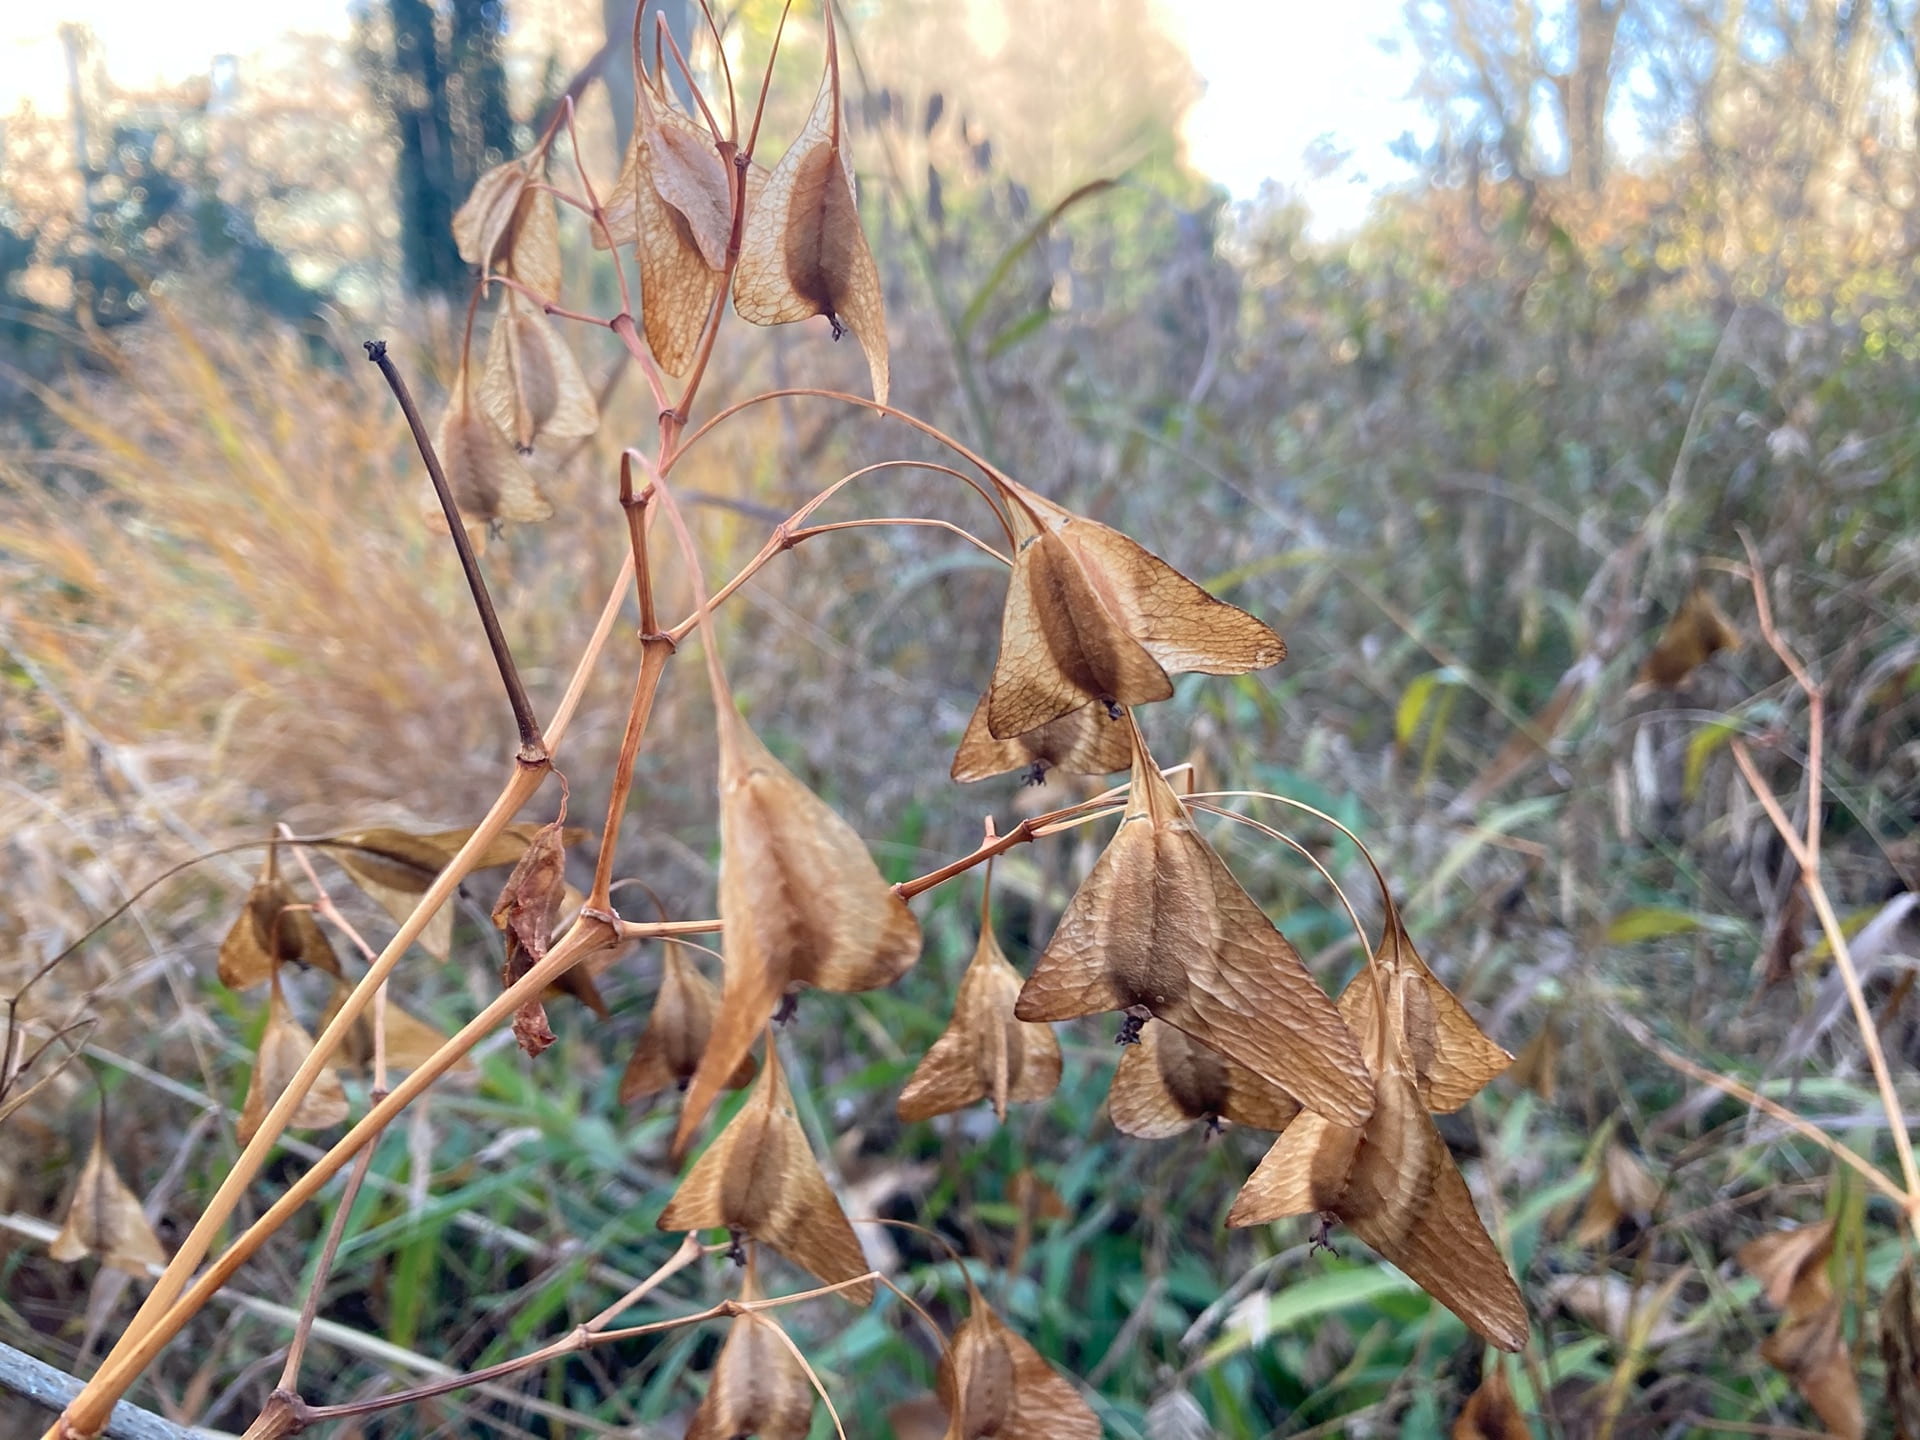 The architectural seed heads of Begonia grandis persist throughout the fall and winter.